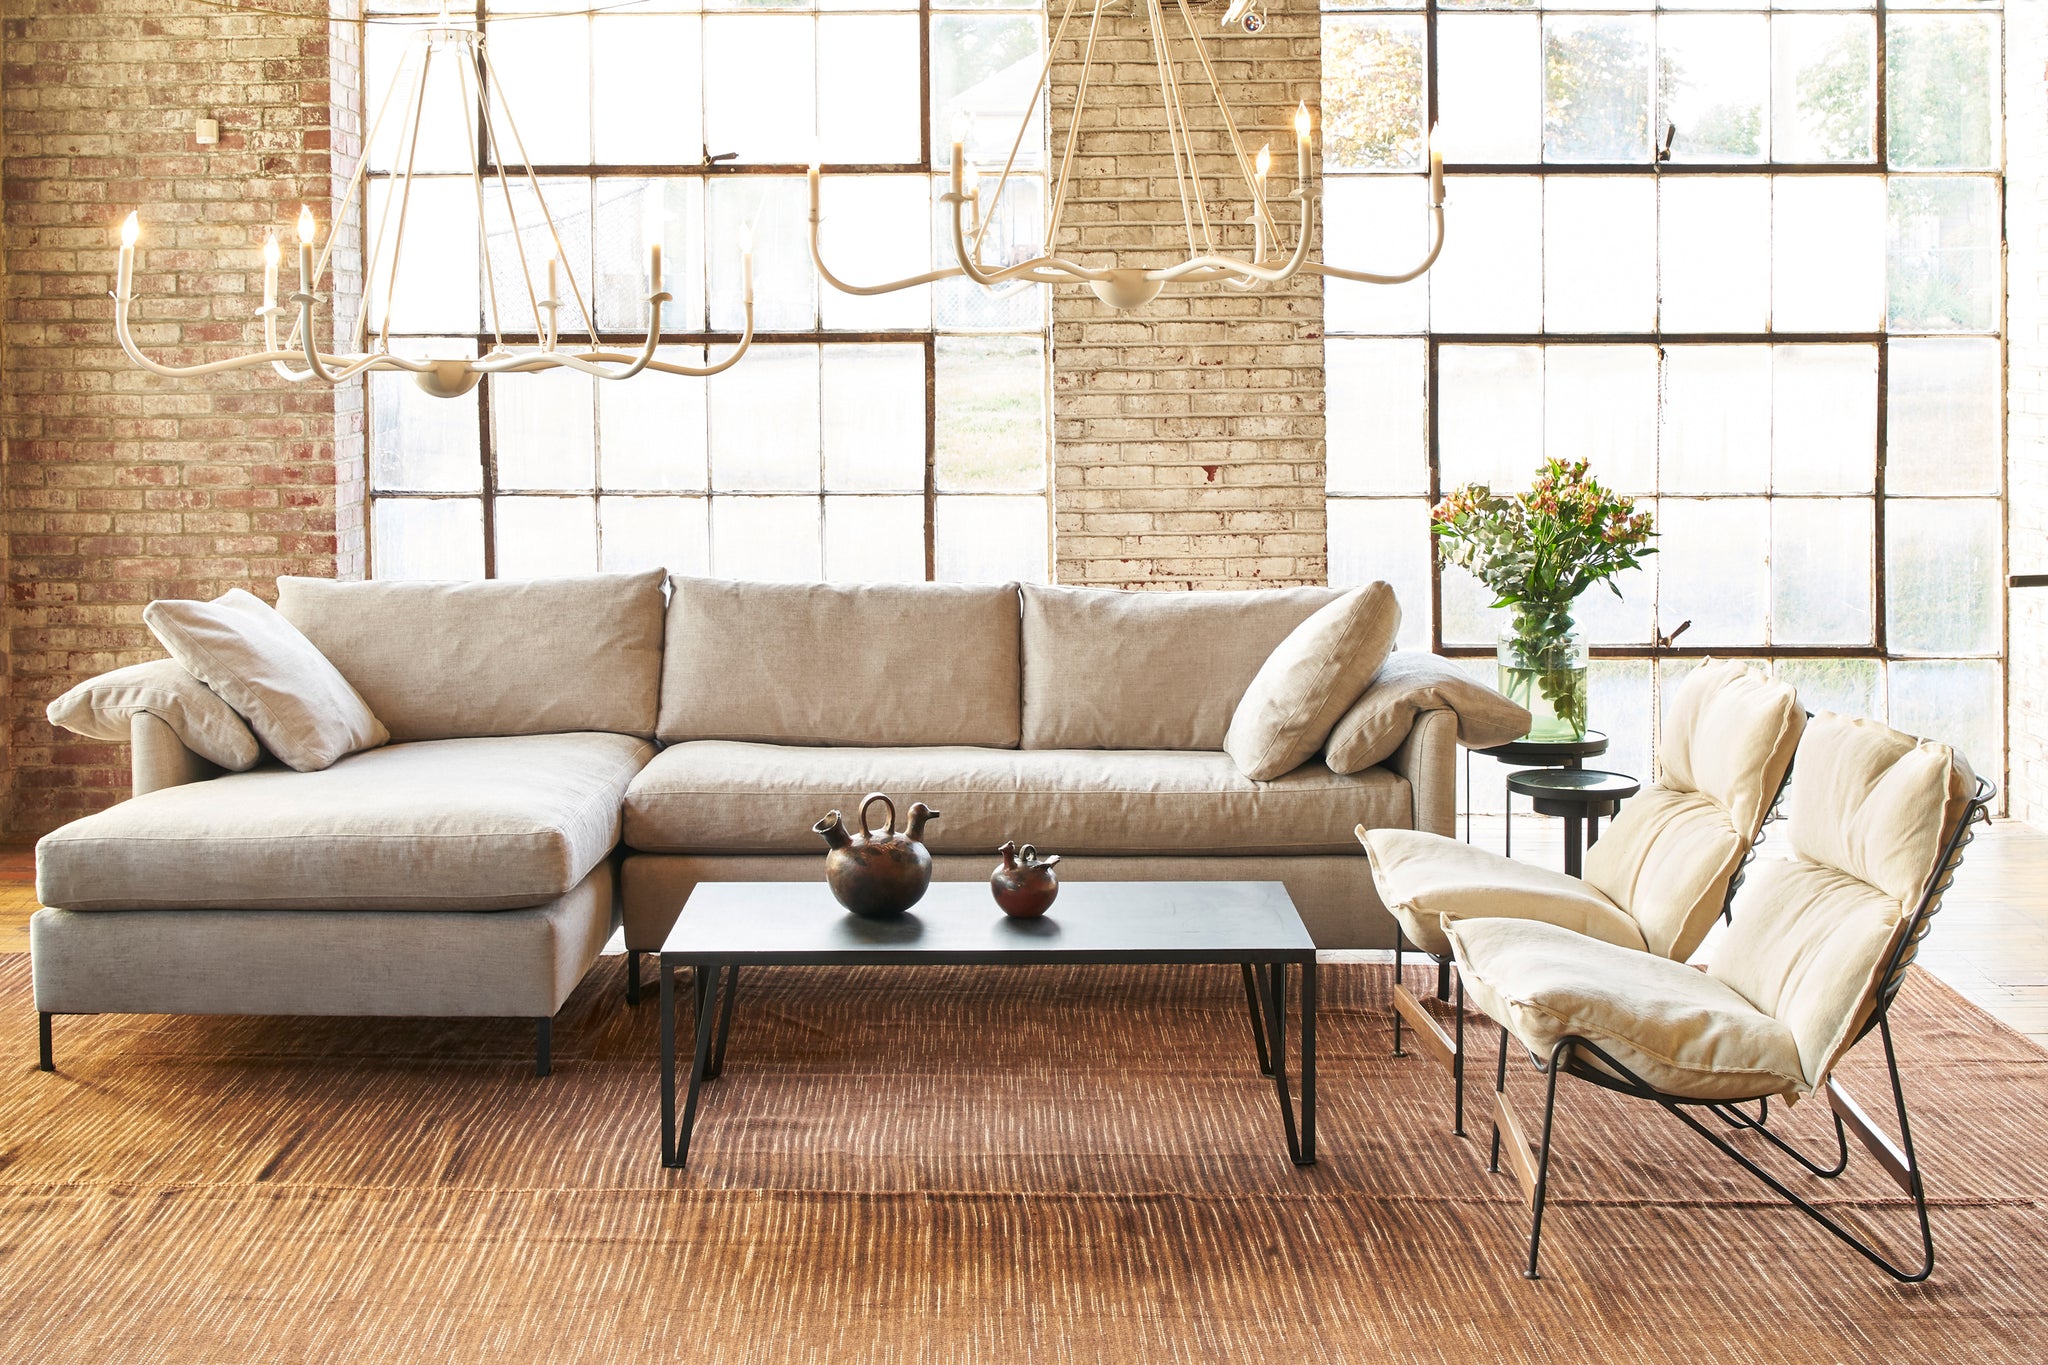  The Radley Sectional is shown with a left arm facing chaise in Arlington Stone fabric sitting with 2 metal chairs with cream colored cushions. Photographed in Arlington Stone. 